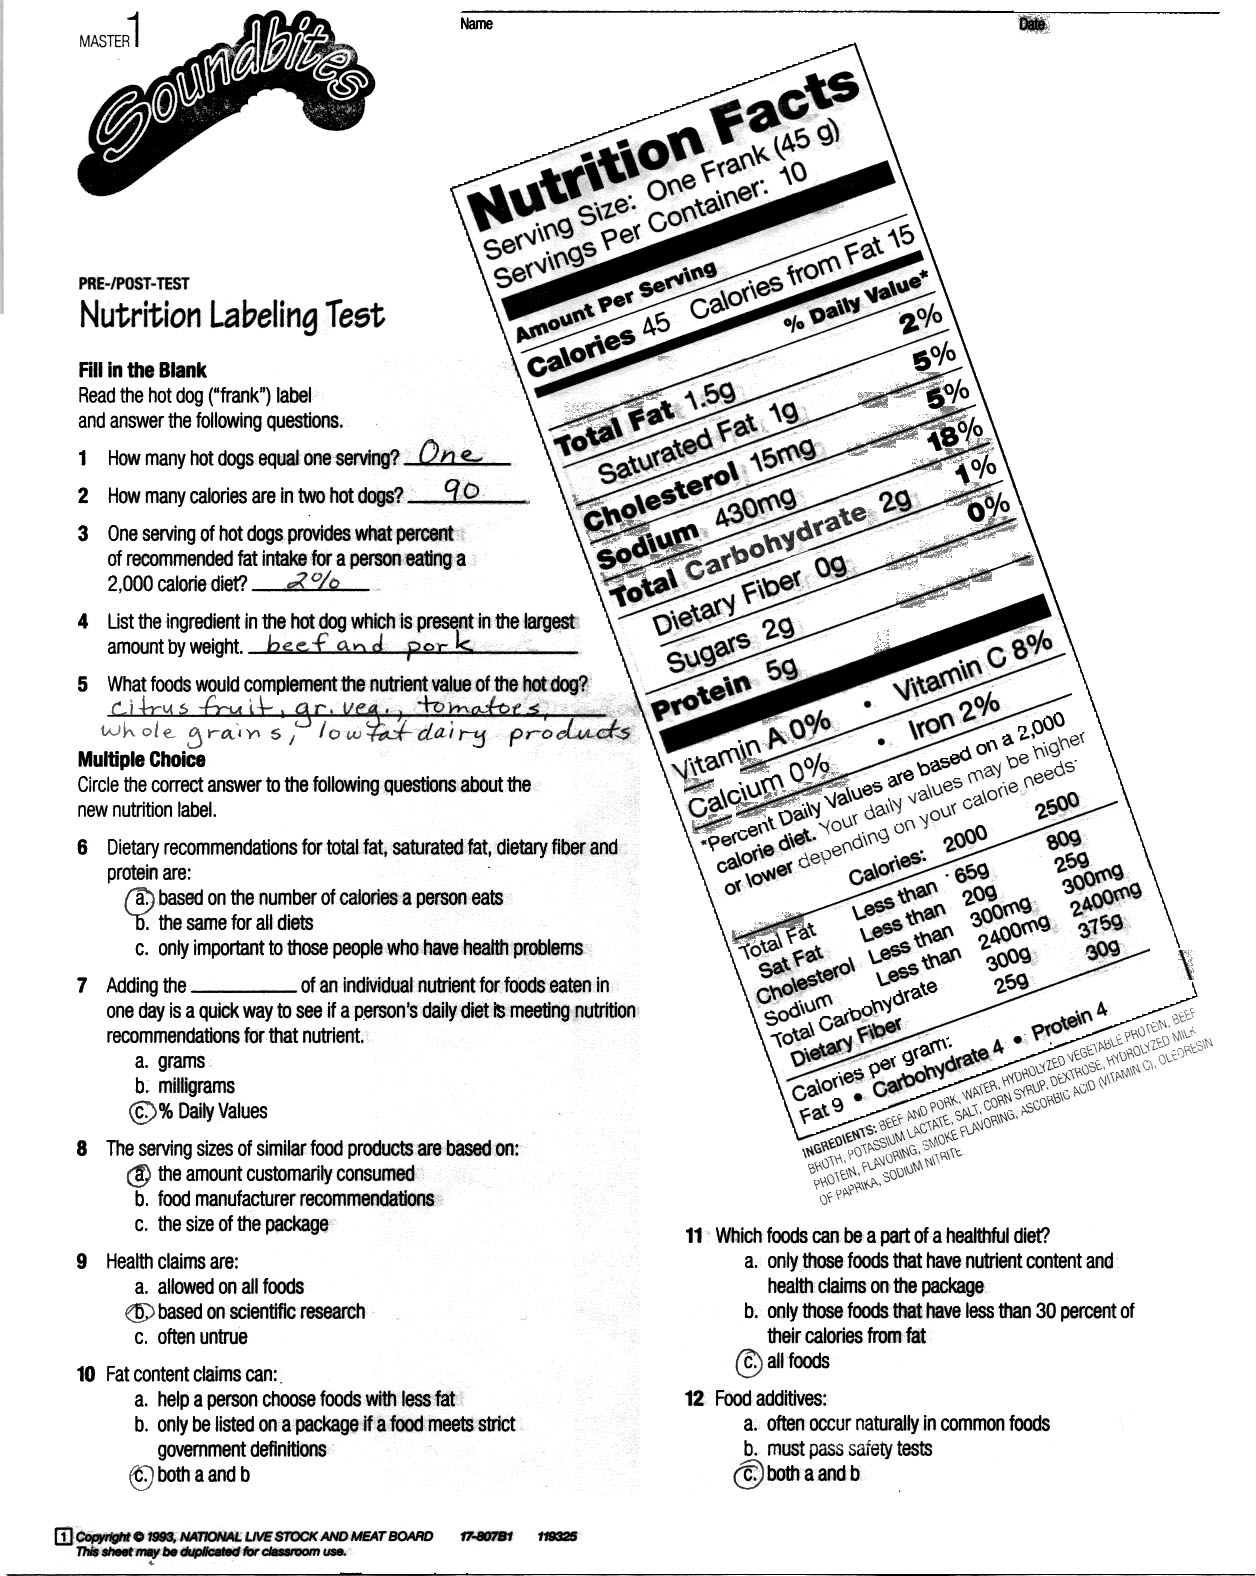 Nutrition Label Worksheet Nscsd Answers - Juleteagyd Intended For Nutrition Label Worksheet Answer